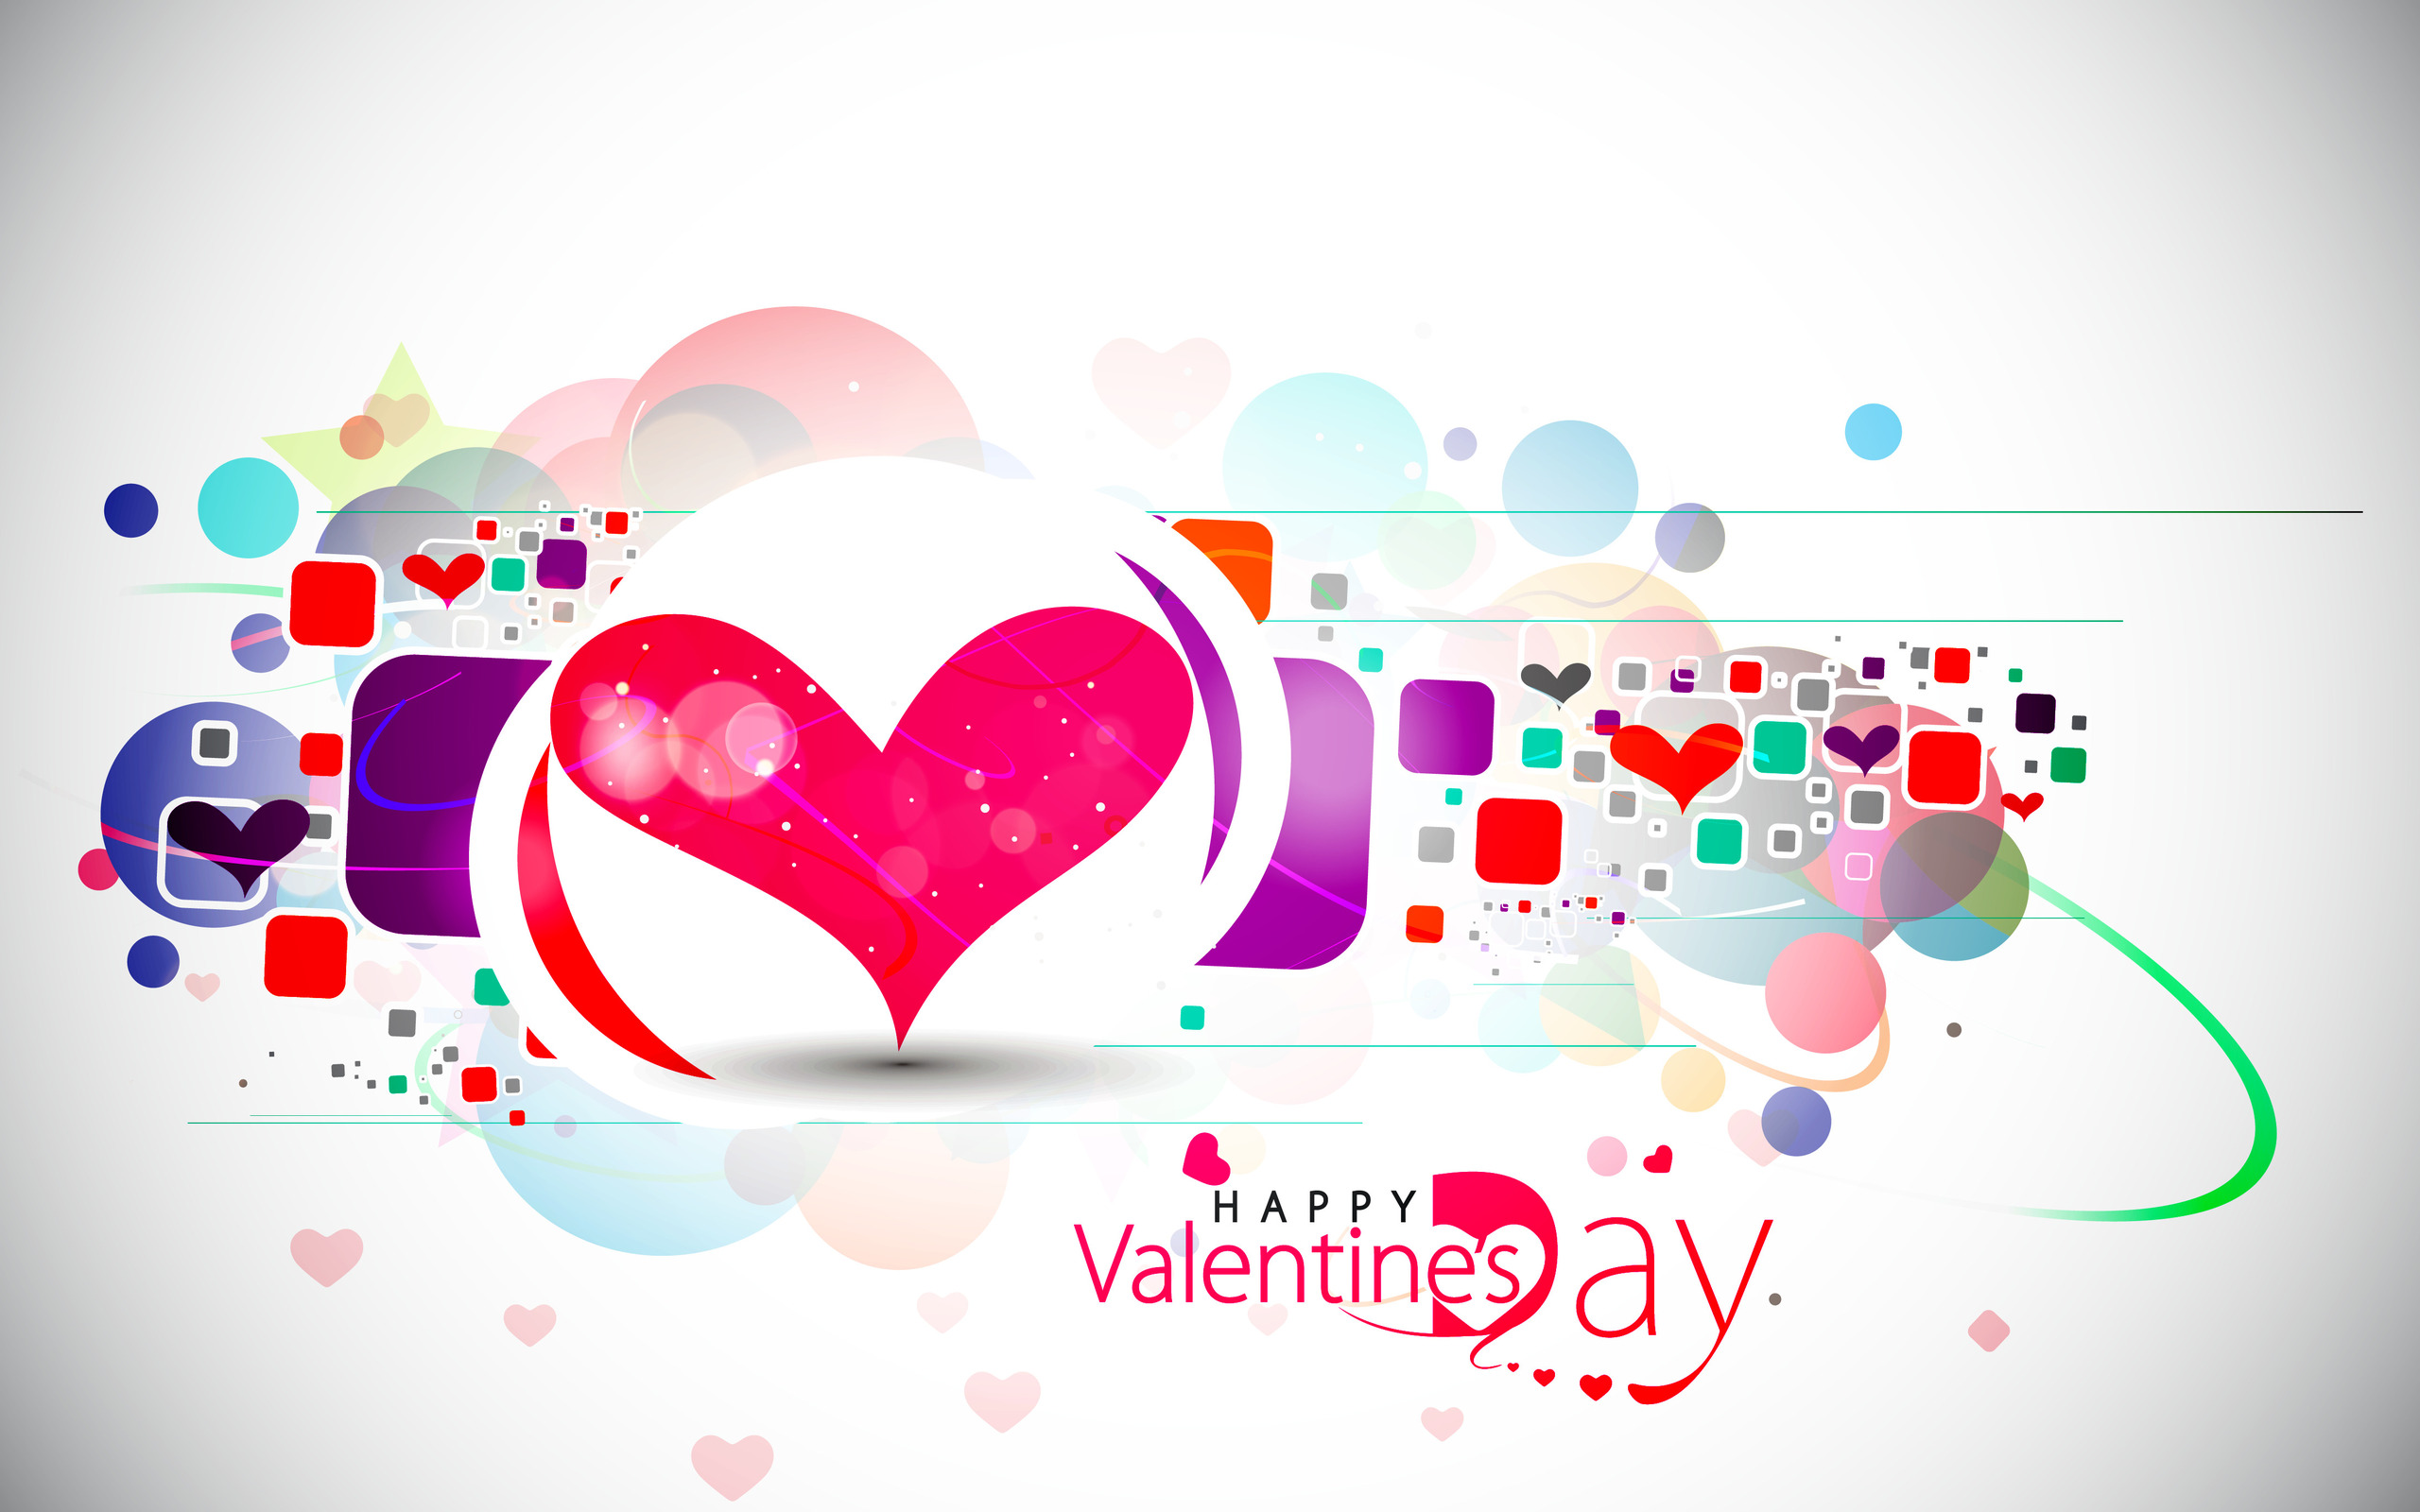 41+ Valentine's Day Hearts Wallpapers: HD, 4K, 5K for PC and Mobile |  Download free images for iPhone, Android